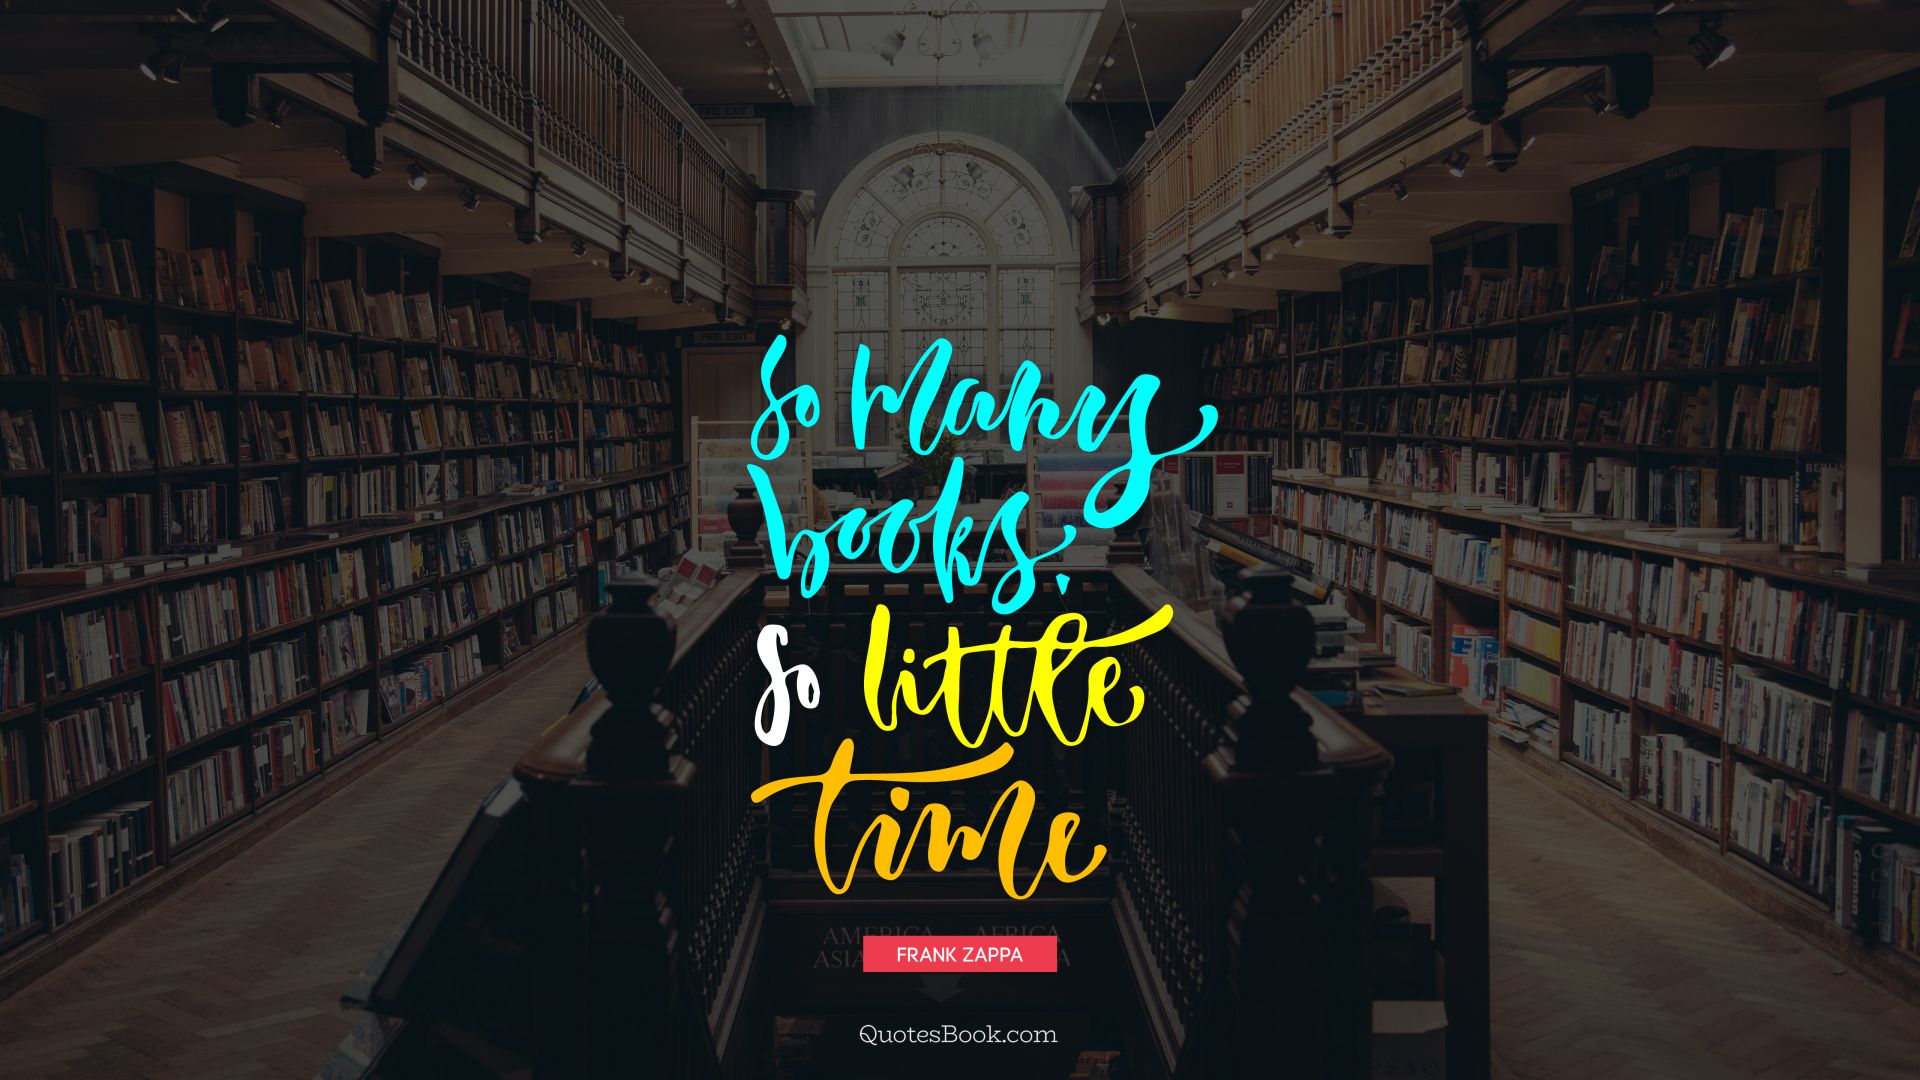 So many books, so little time. - Quote by Frank Zappa